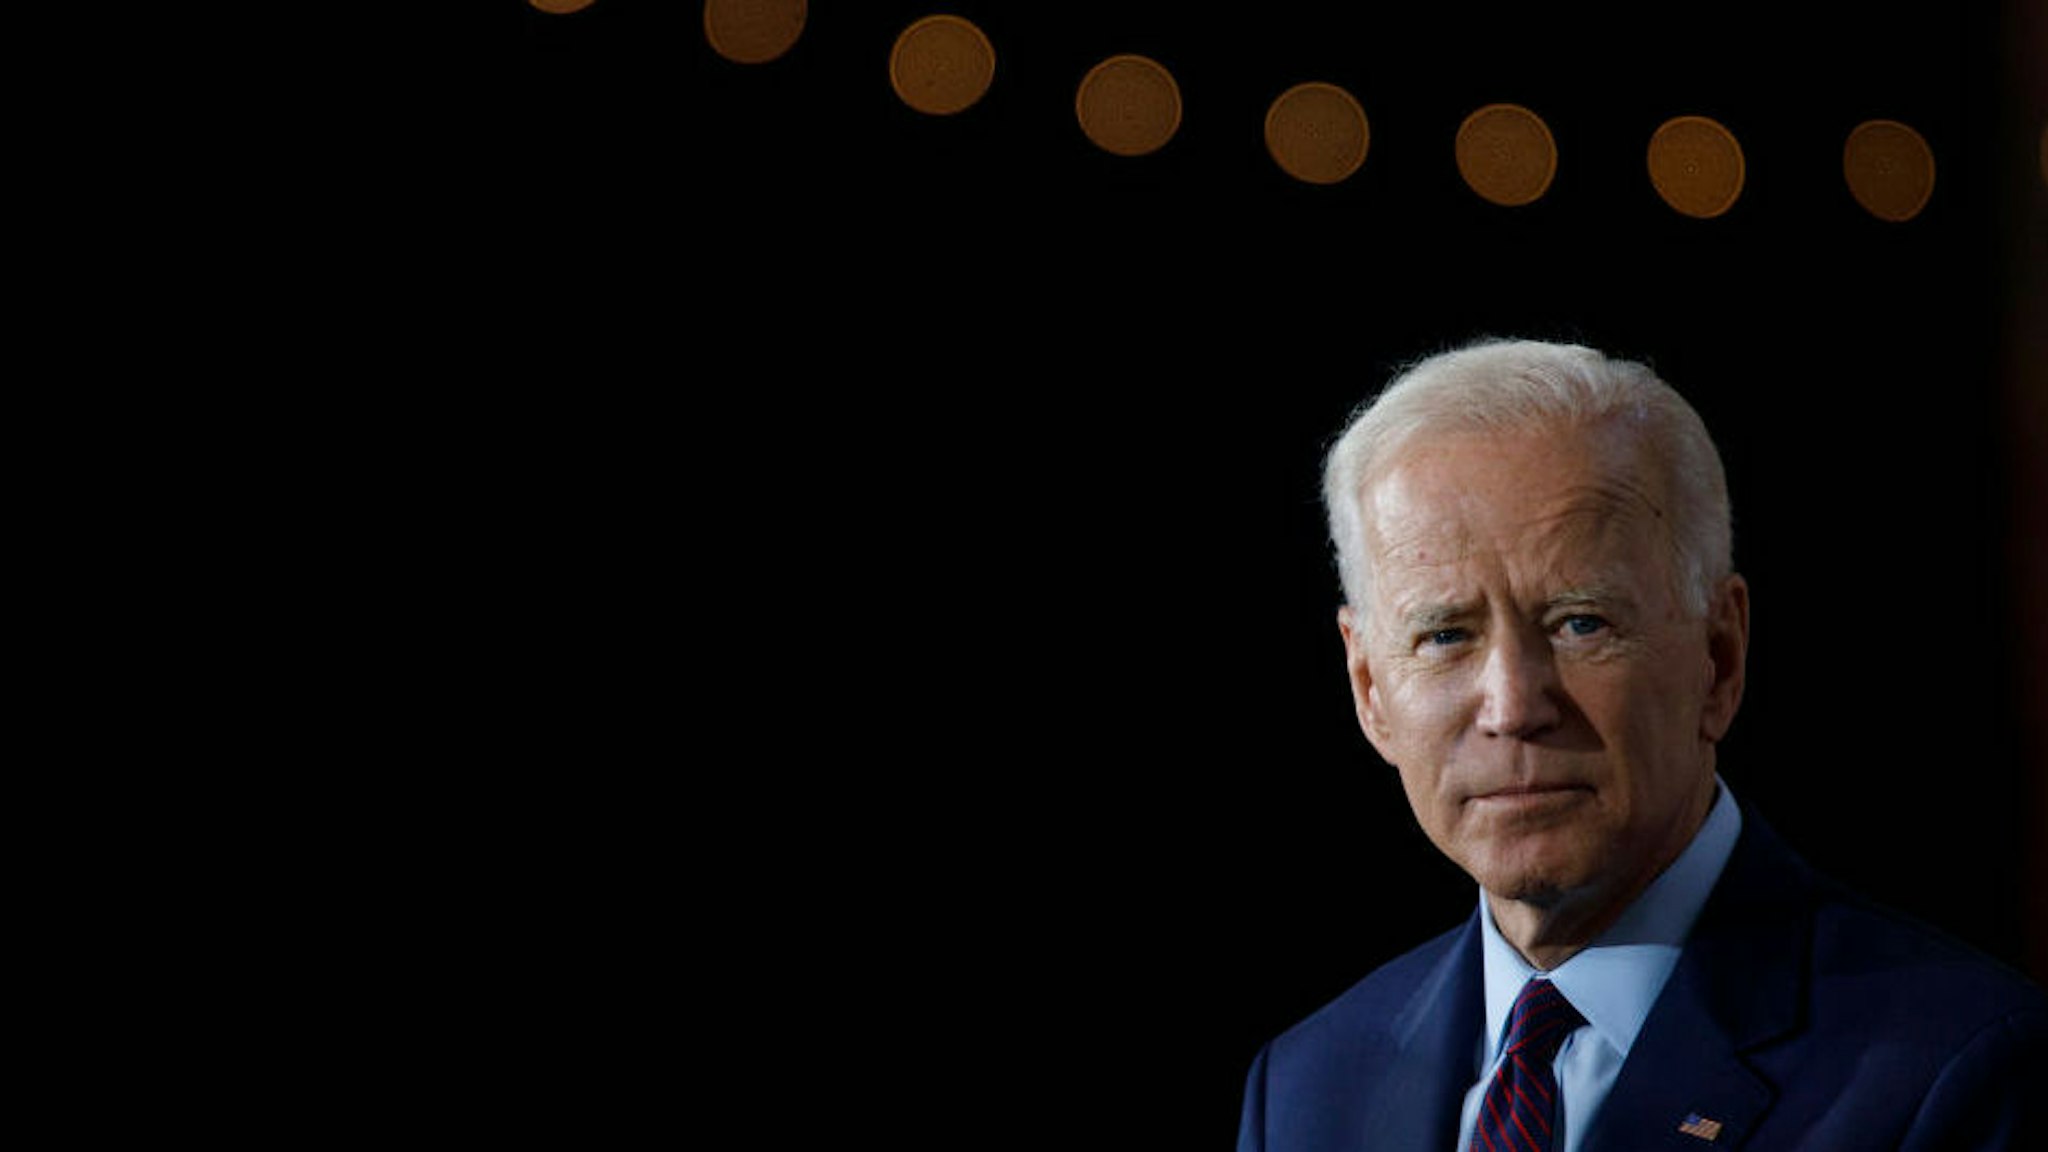 BURLINGTON, IA - AUGUST 07: Former Vice President Joe Biden delivers remarks about White Nationalism during a campaign press conference on August 7, 2019 in Burlington, Iowa.